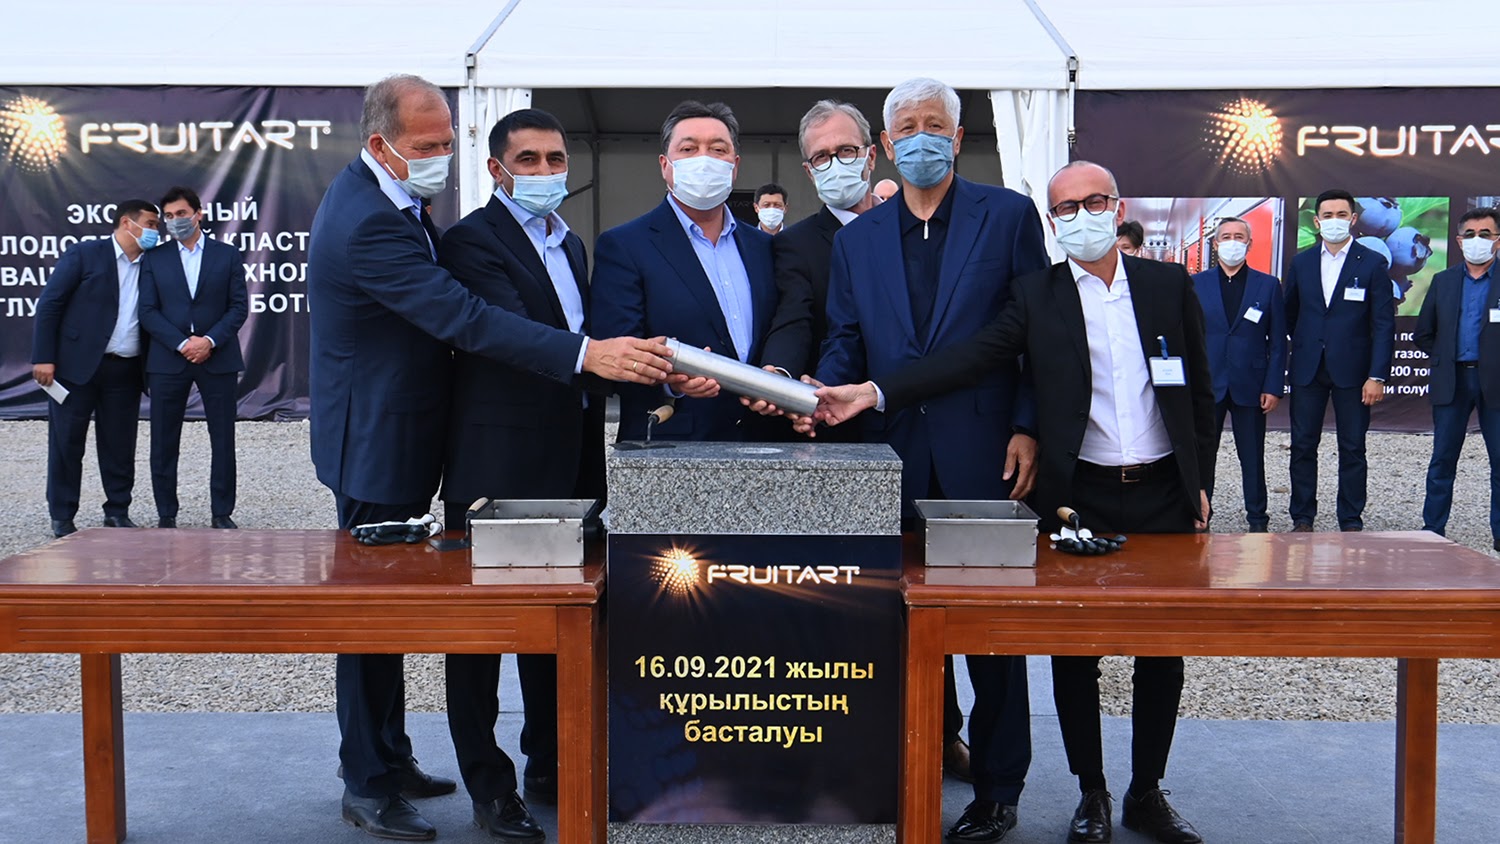 Almaty region launched a feed mill and is building a fruit and berry cluster